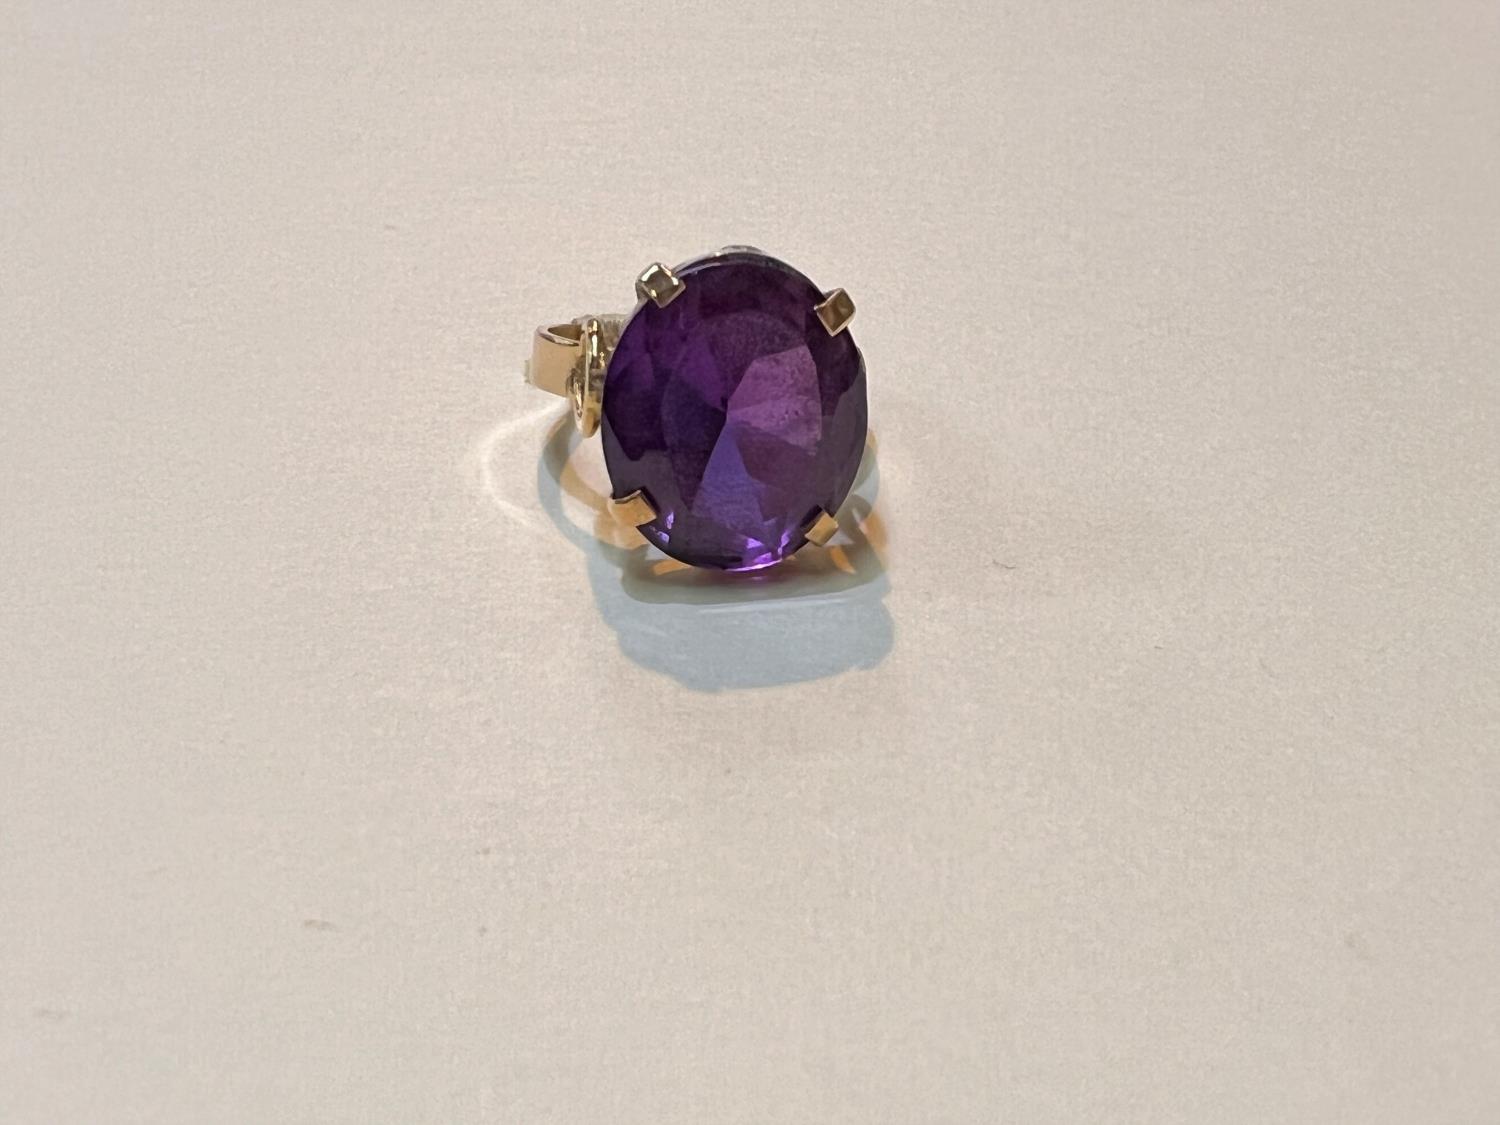 A yellow metal ring with large amethyst stone, Egyptian marked, weight 5.9gms, size M.